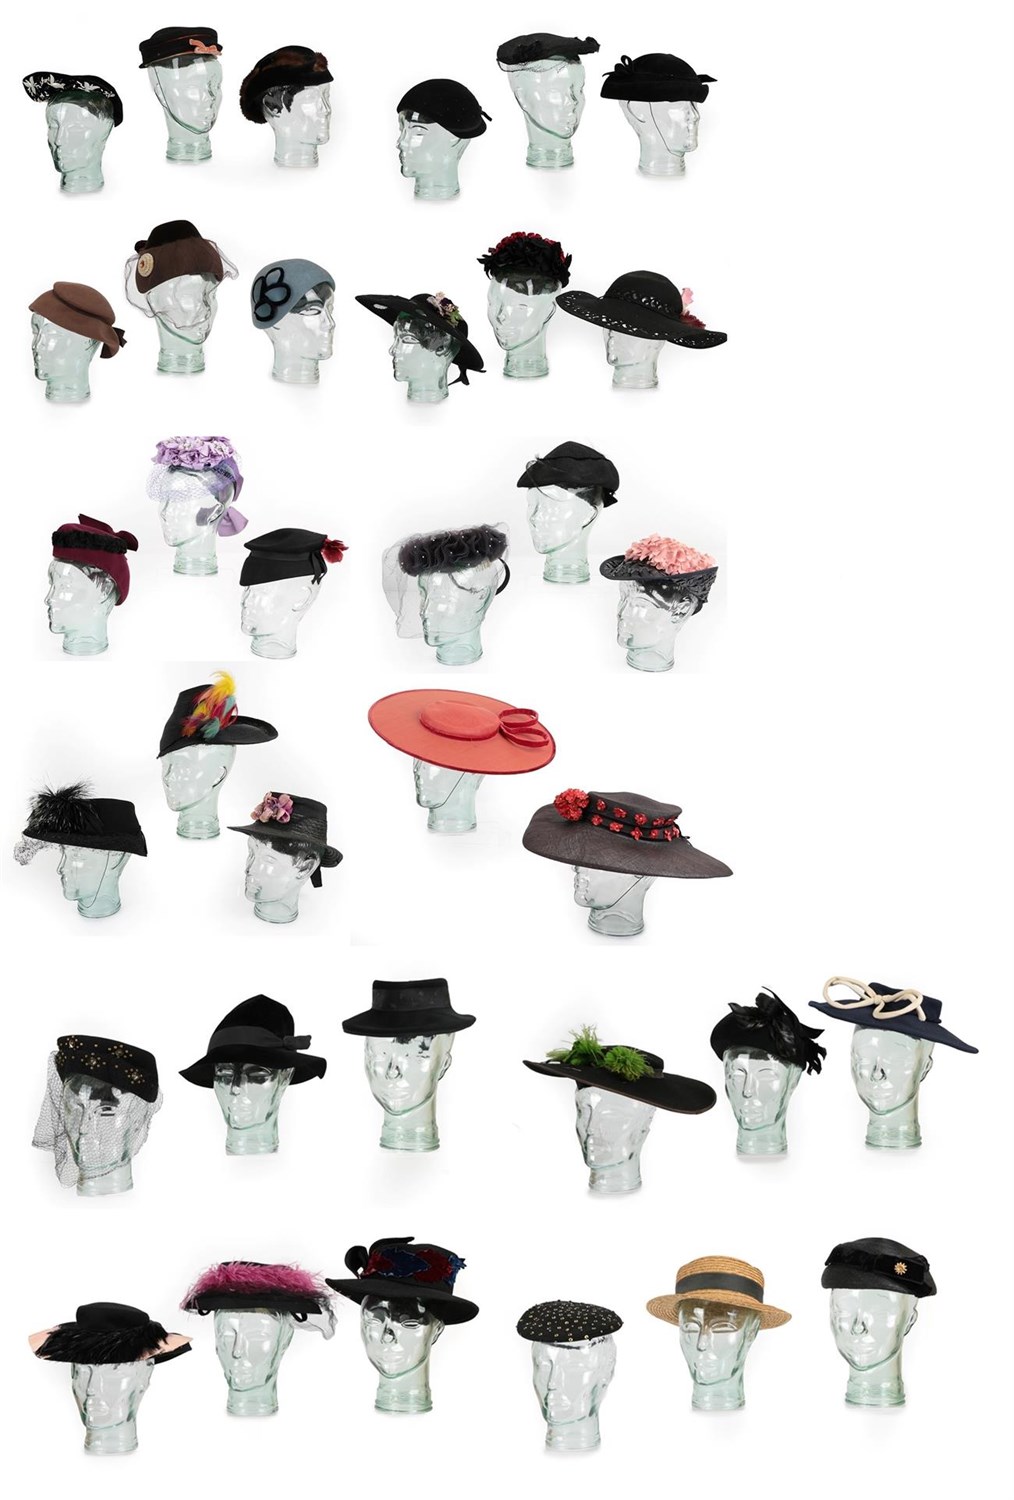 Lot 2252 - Approximately Thirty Five Circa 1940's Ladies' Hats, some with labels, floral corsages, in felt and